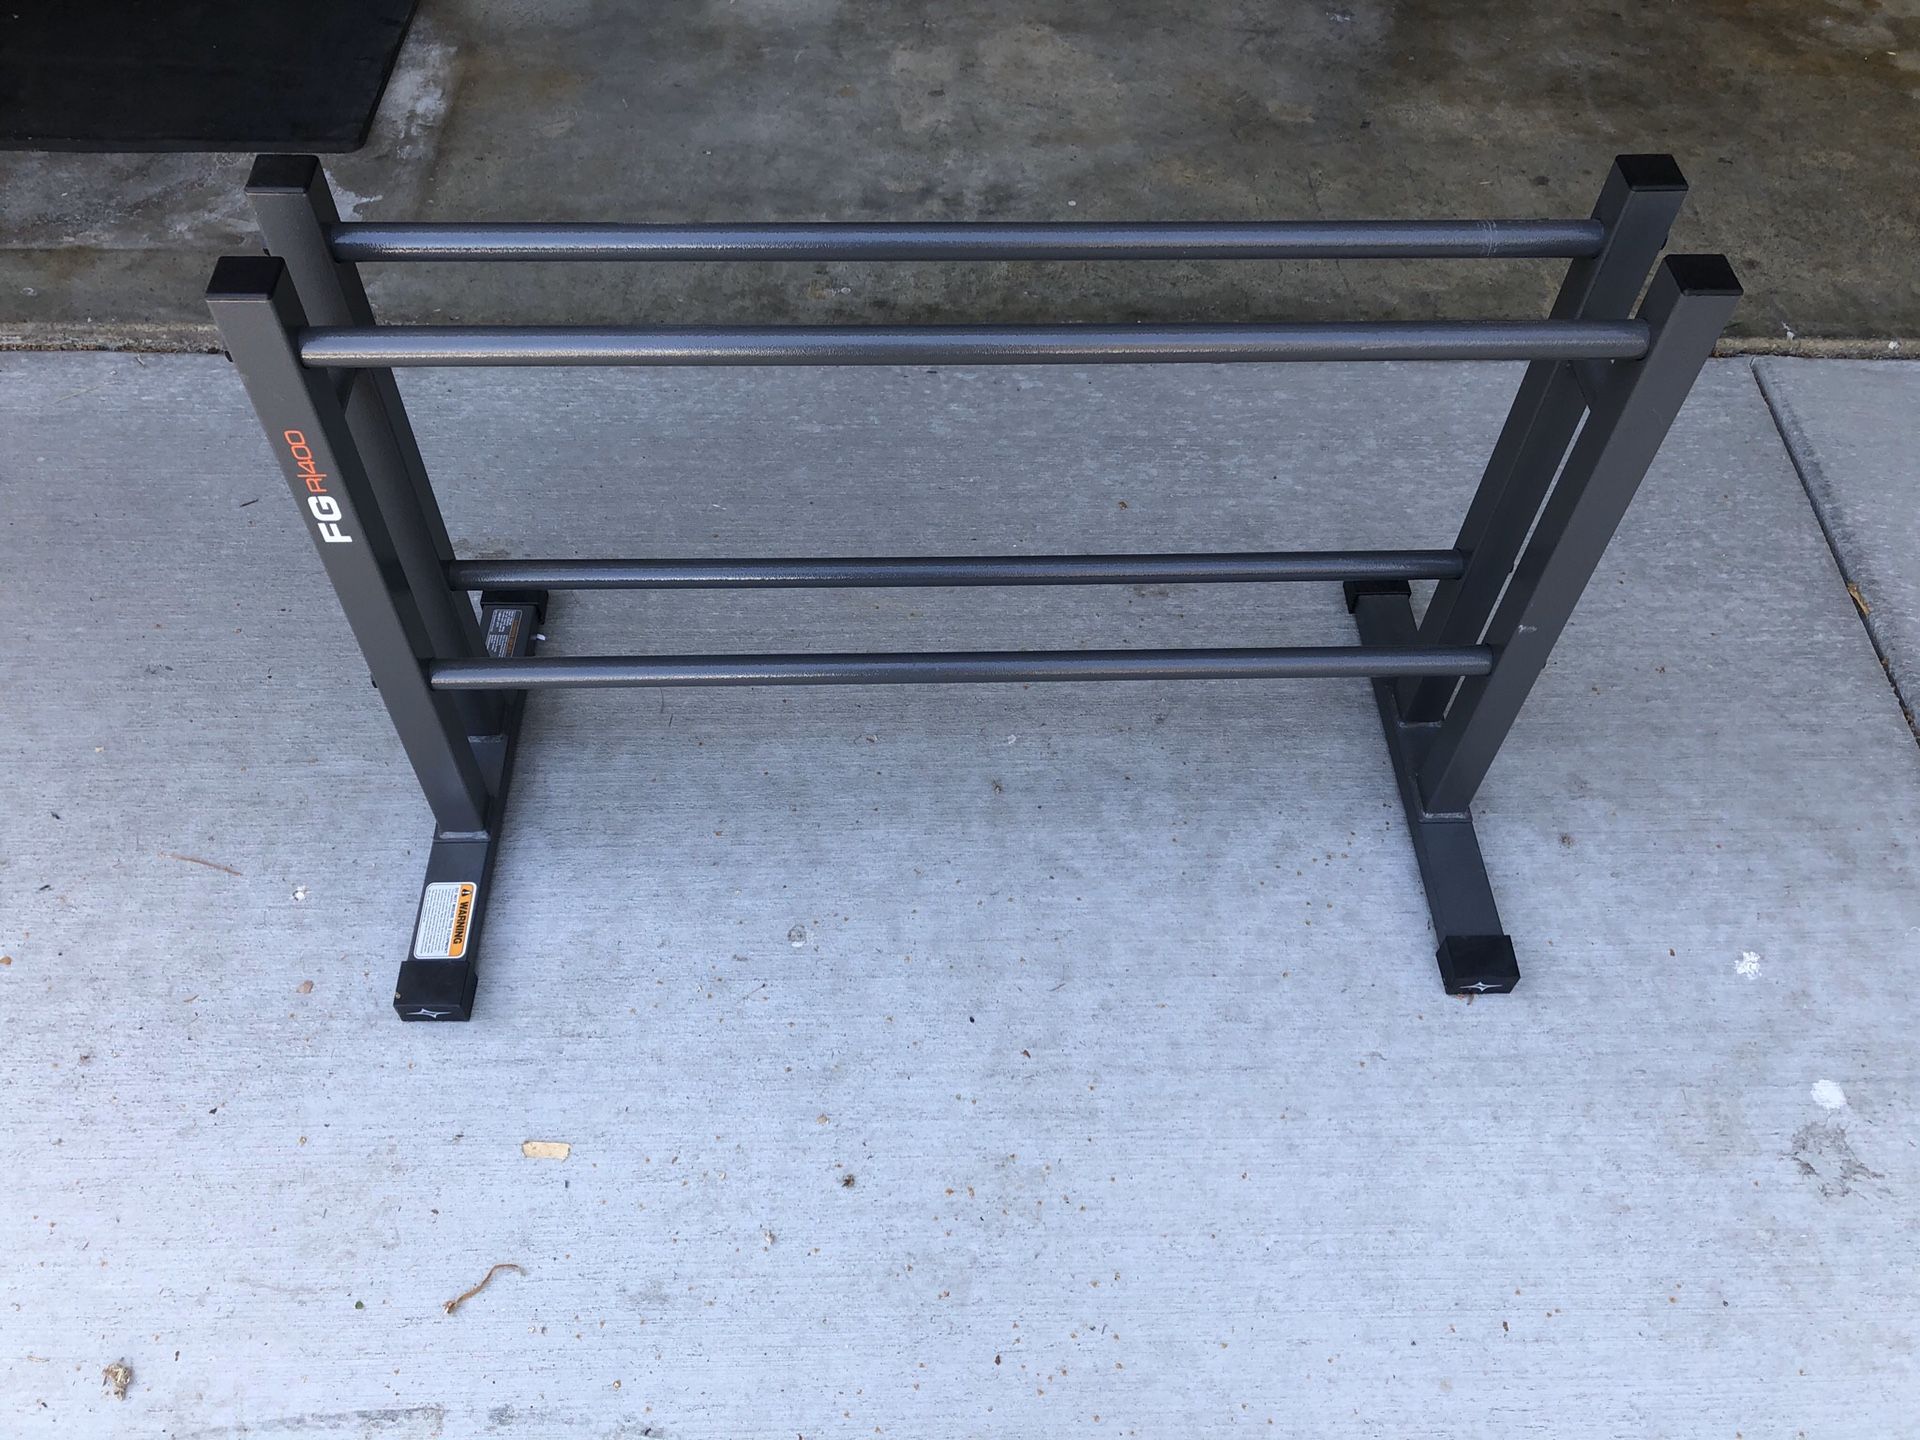 FG R400 dumbbell rack -NO WEIGHTS